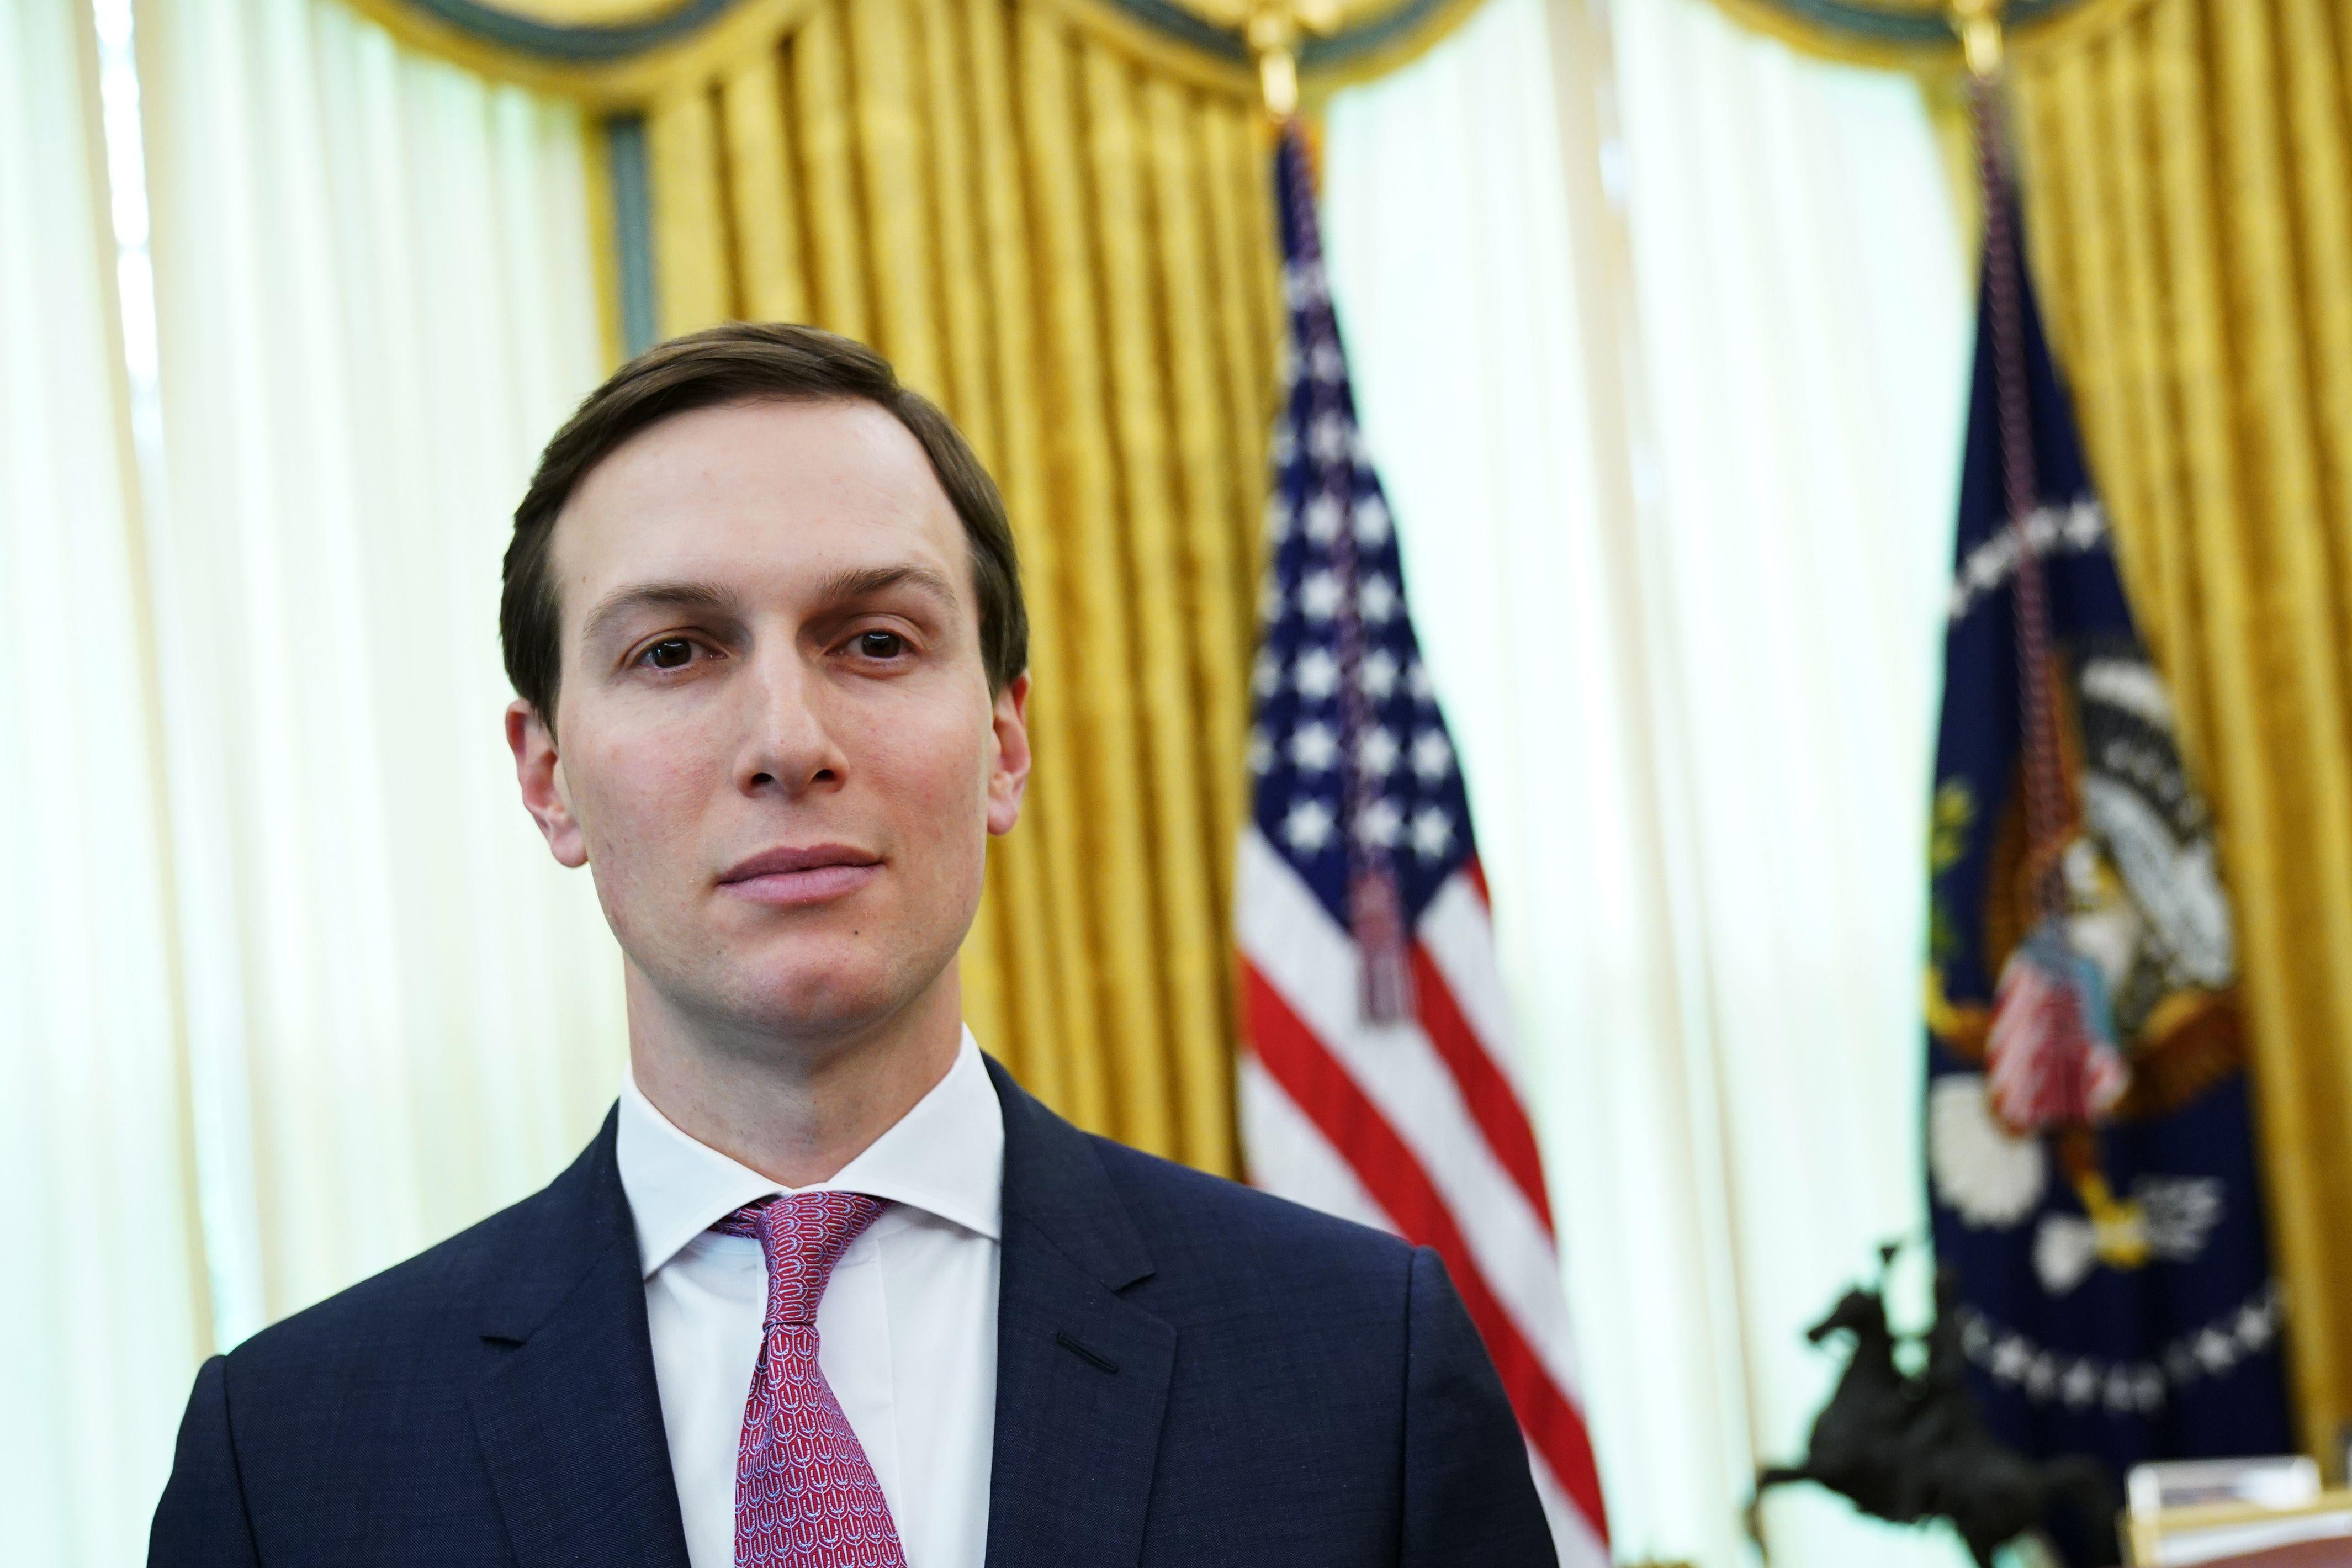 Jared Kushner smirks in a close-up photo in the Oval Office.